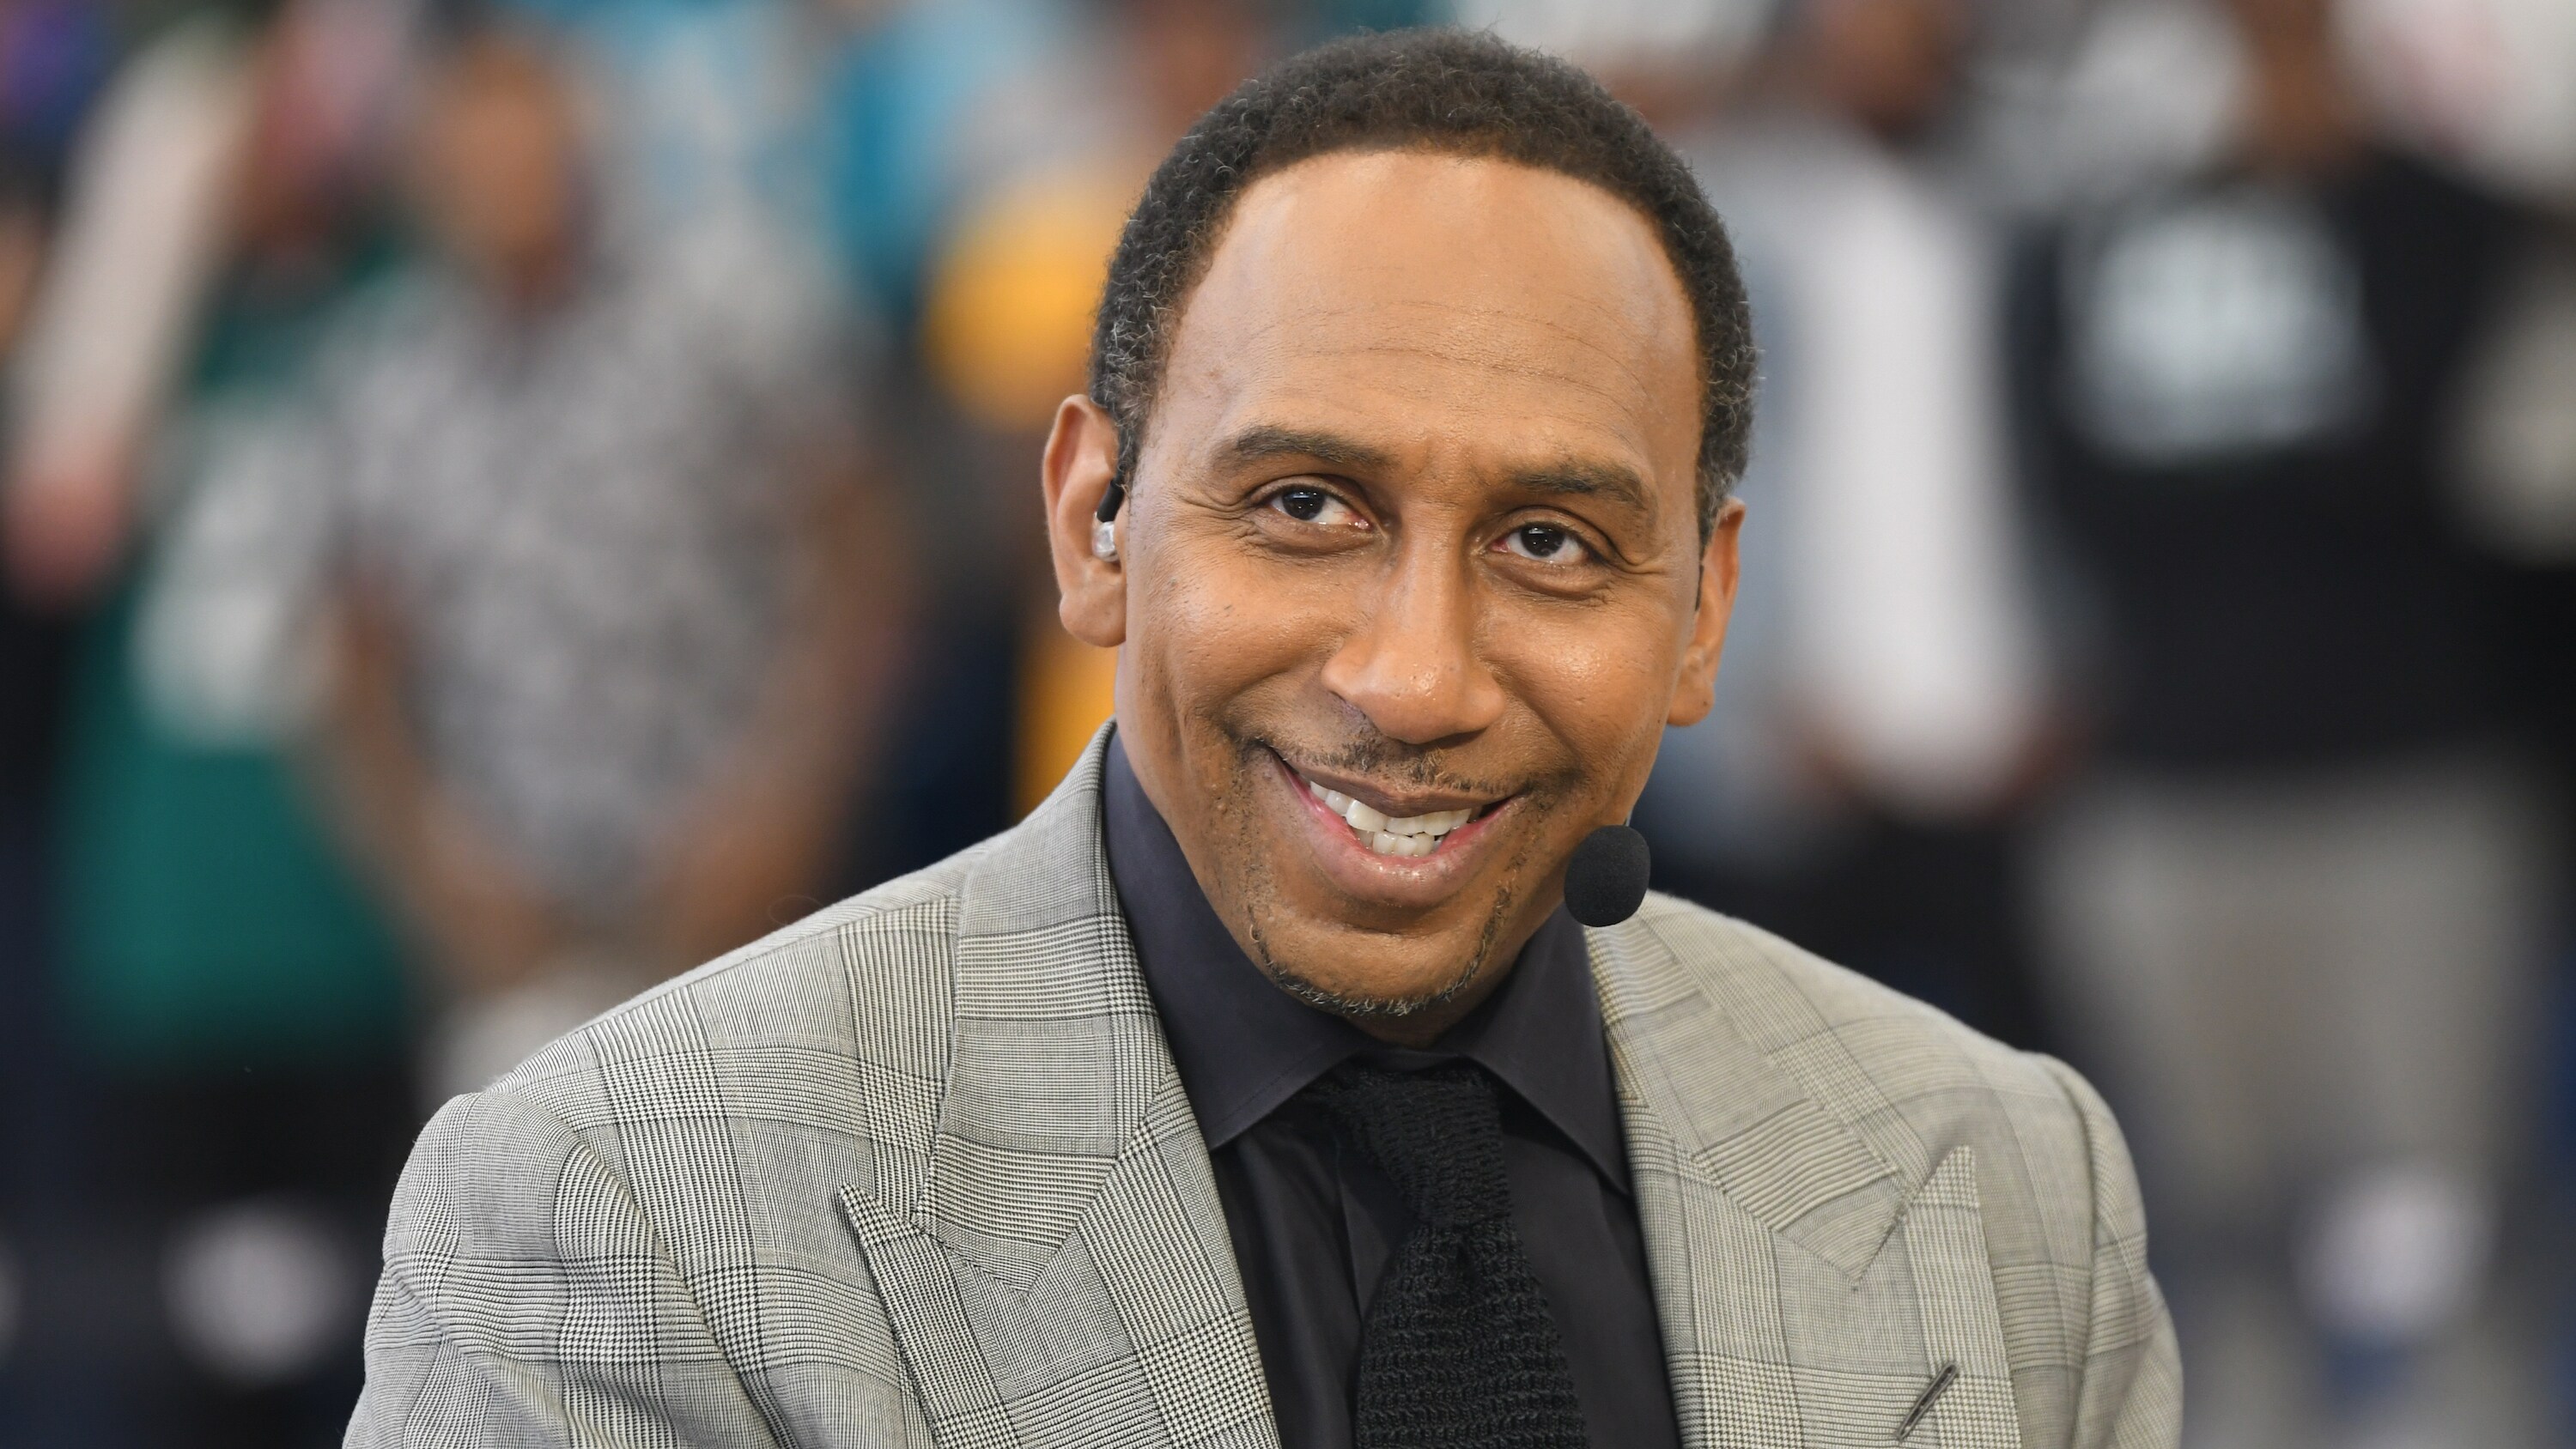 Wilmington, DE - September 20, 2019 - 76ers Fieldhouse: Stephen A. Smith on the set of First Take (Photo by Mikey Reeves / ESPN Images)